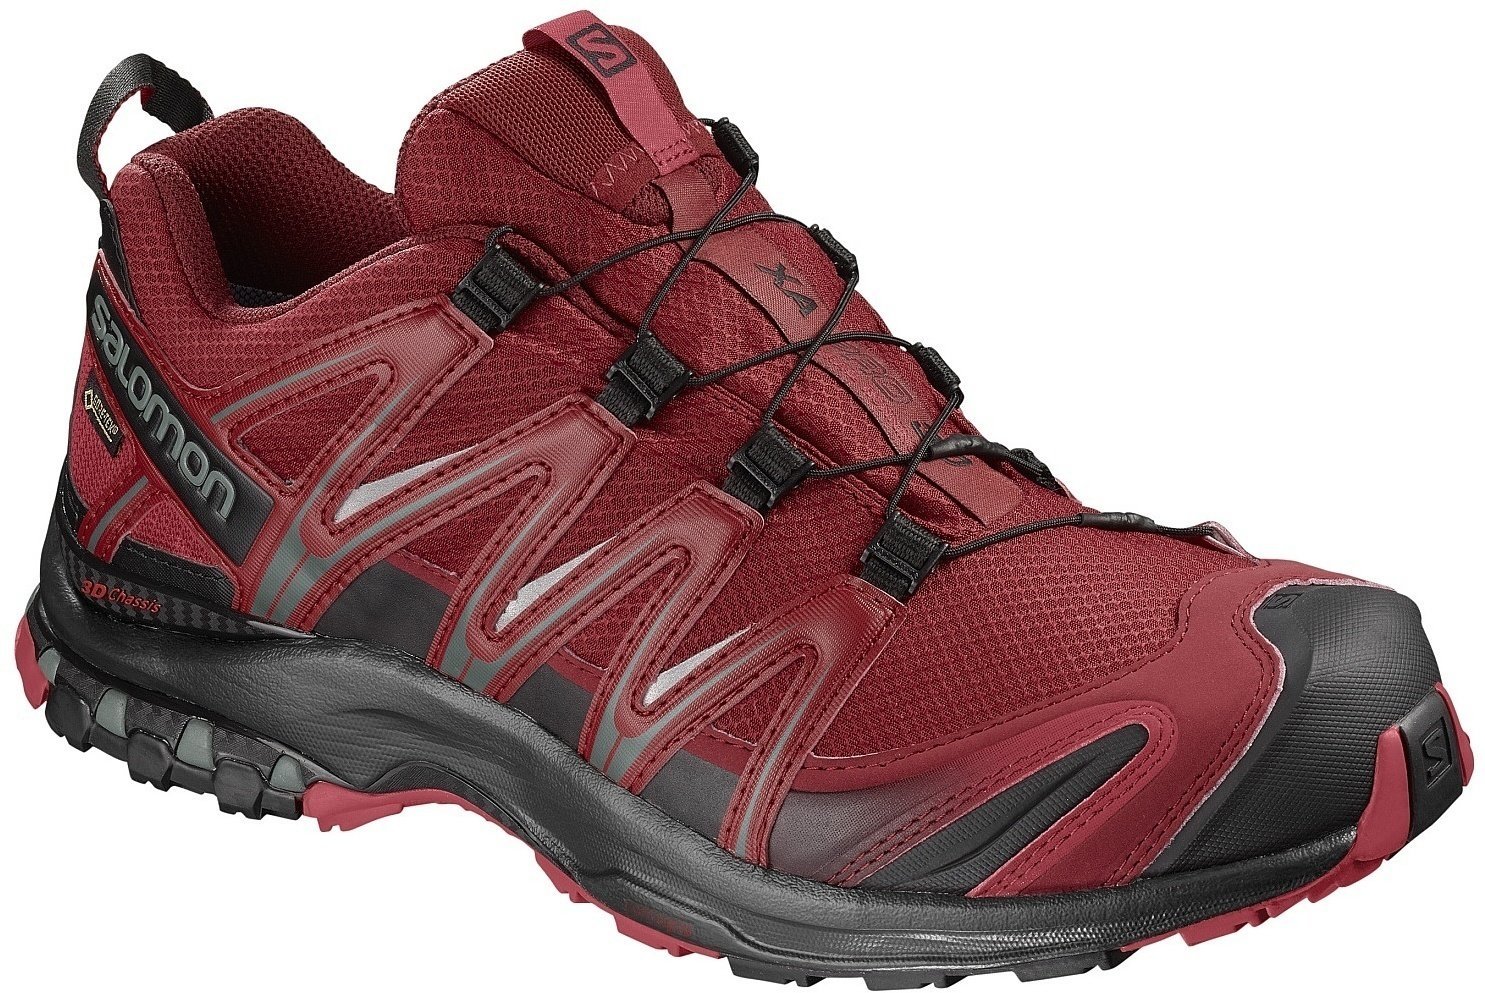 Chaussures outdoor hommes Salomon XA Pro 3D GTX Red Dahlia/Black/Barbados Cherry 44 Chaussures outdoor hommes